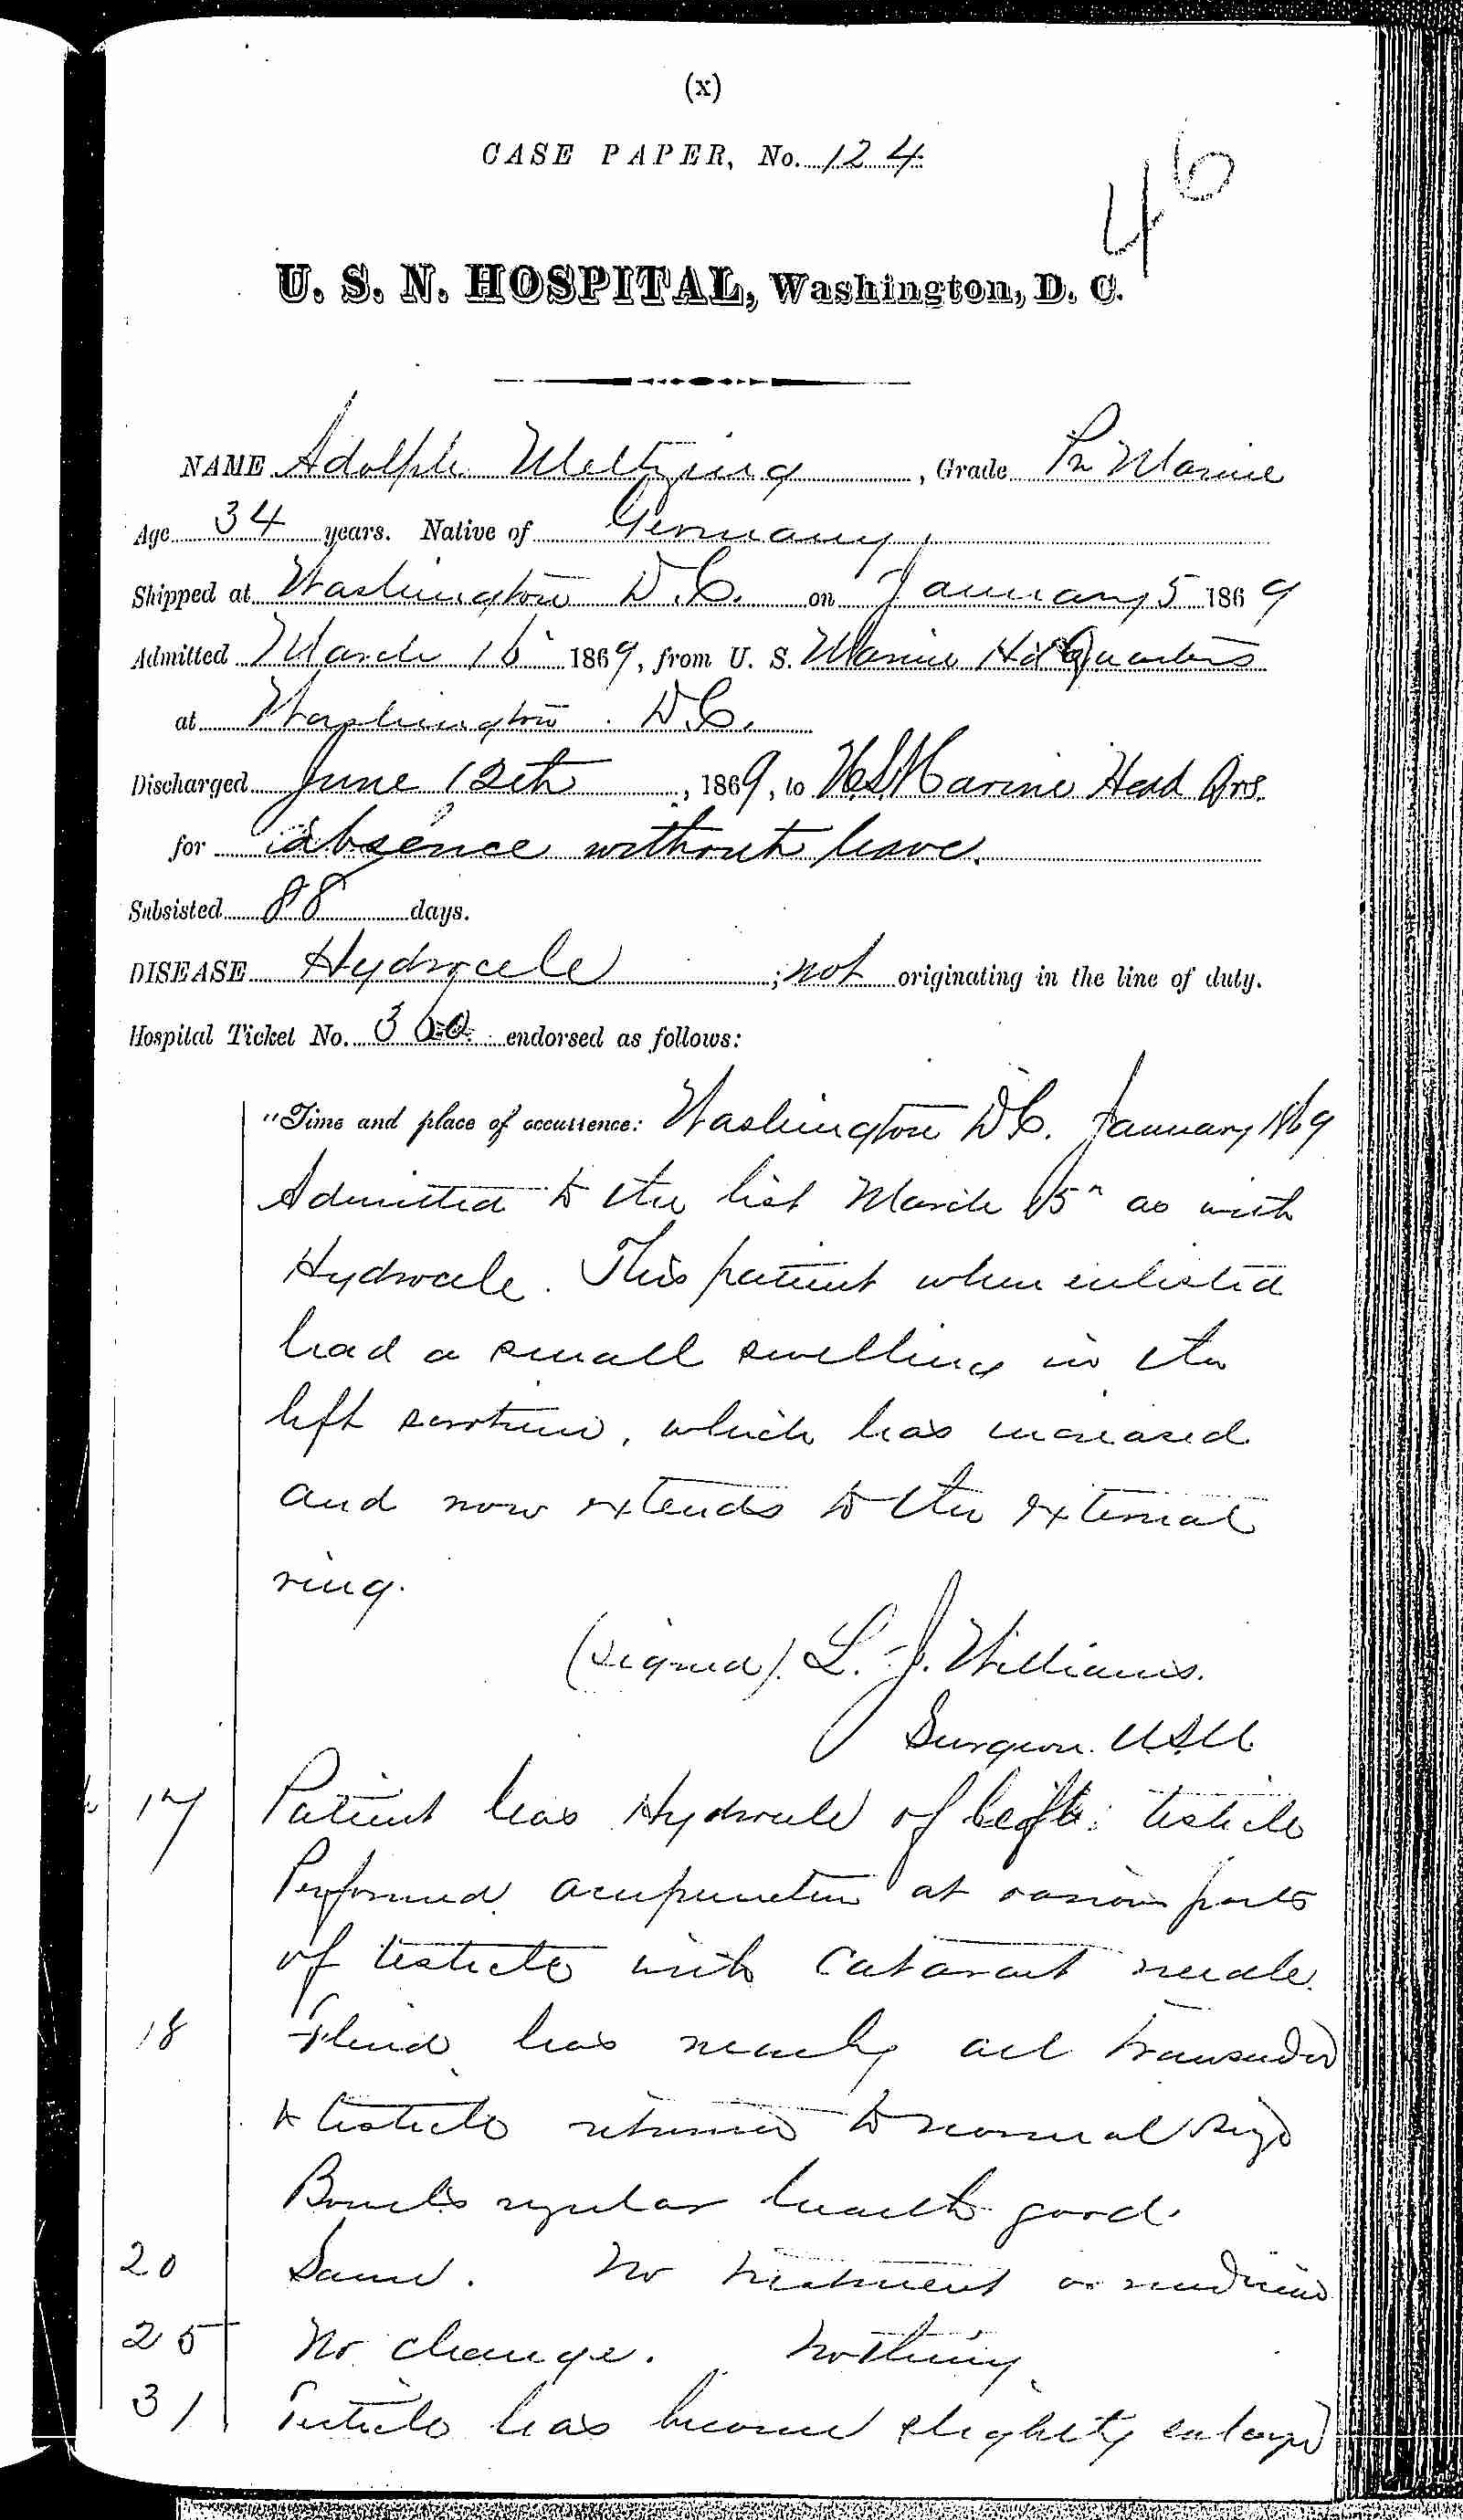 Entry for Adolph Meltzing (first admission page 1 of 4) in the log Hospital Tickets and Case Papers - Naval Hospital - Washington, D.C. - 1868-69